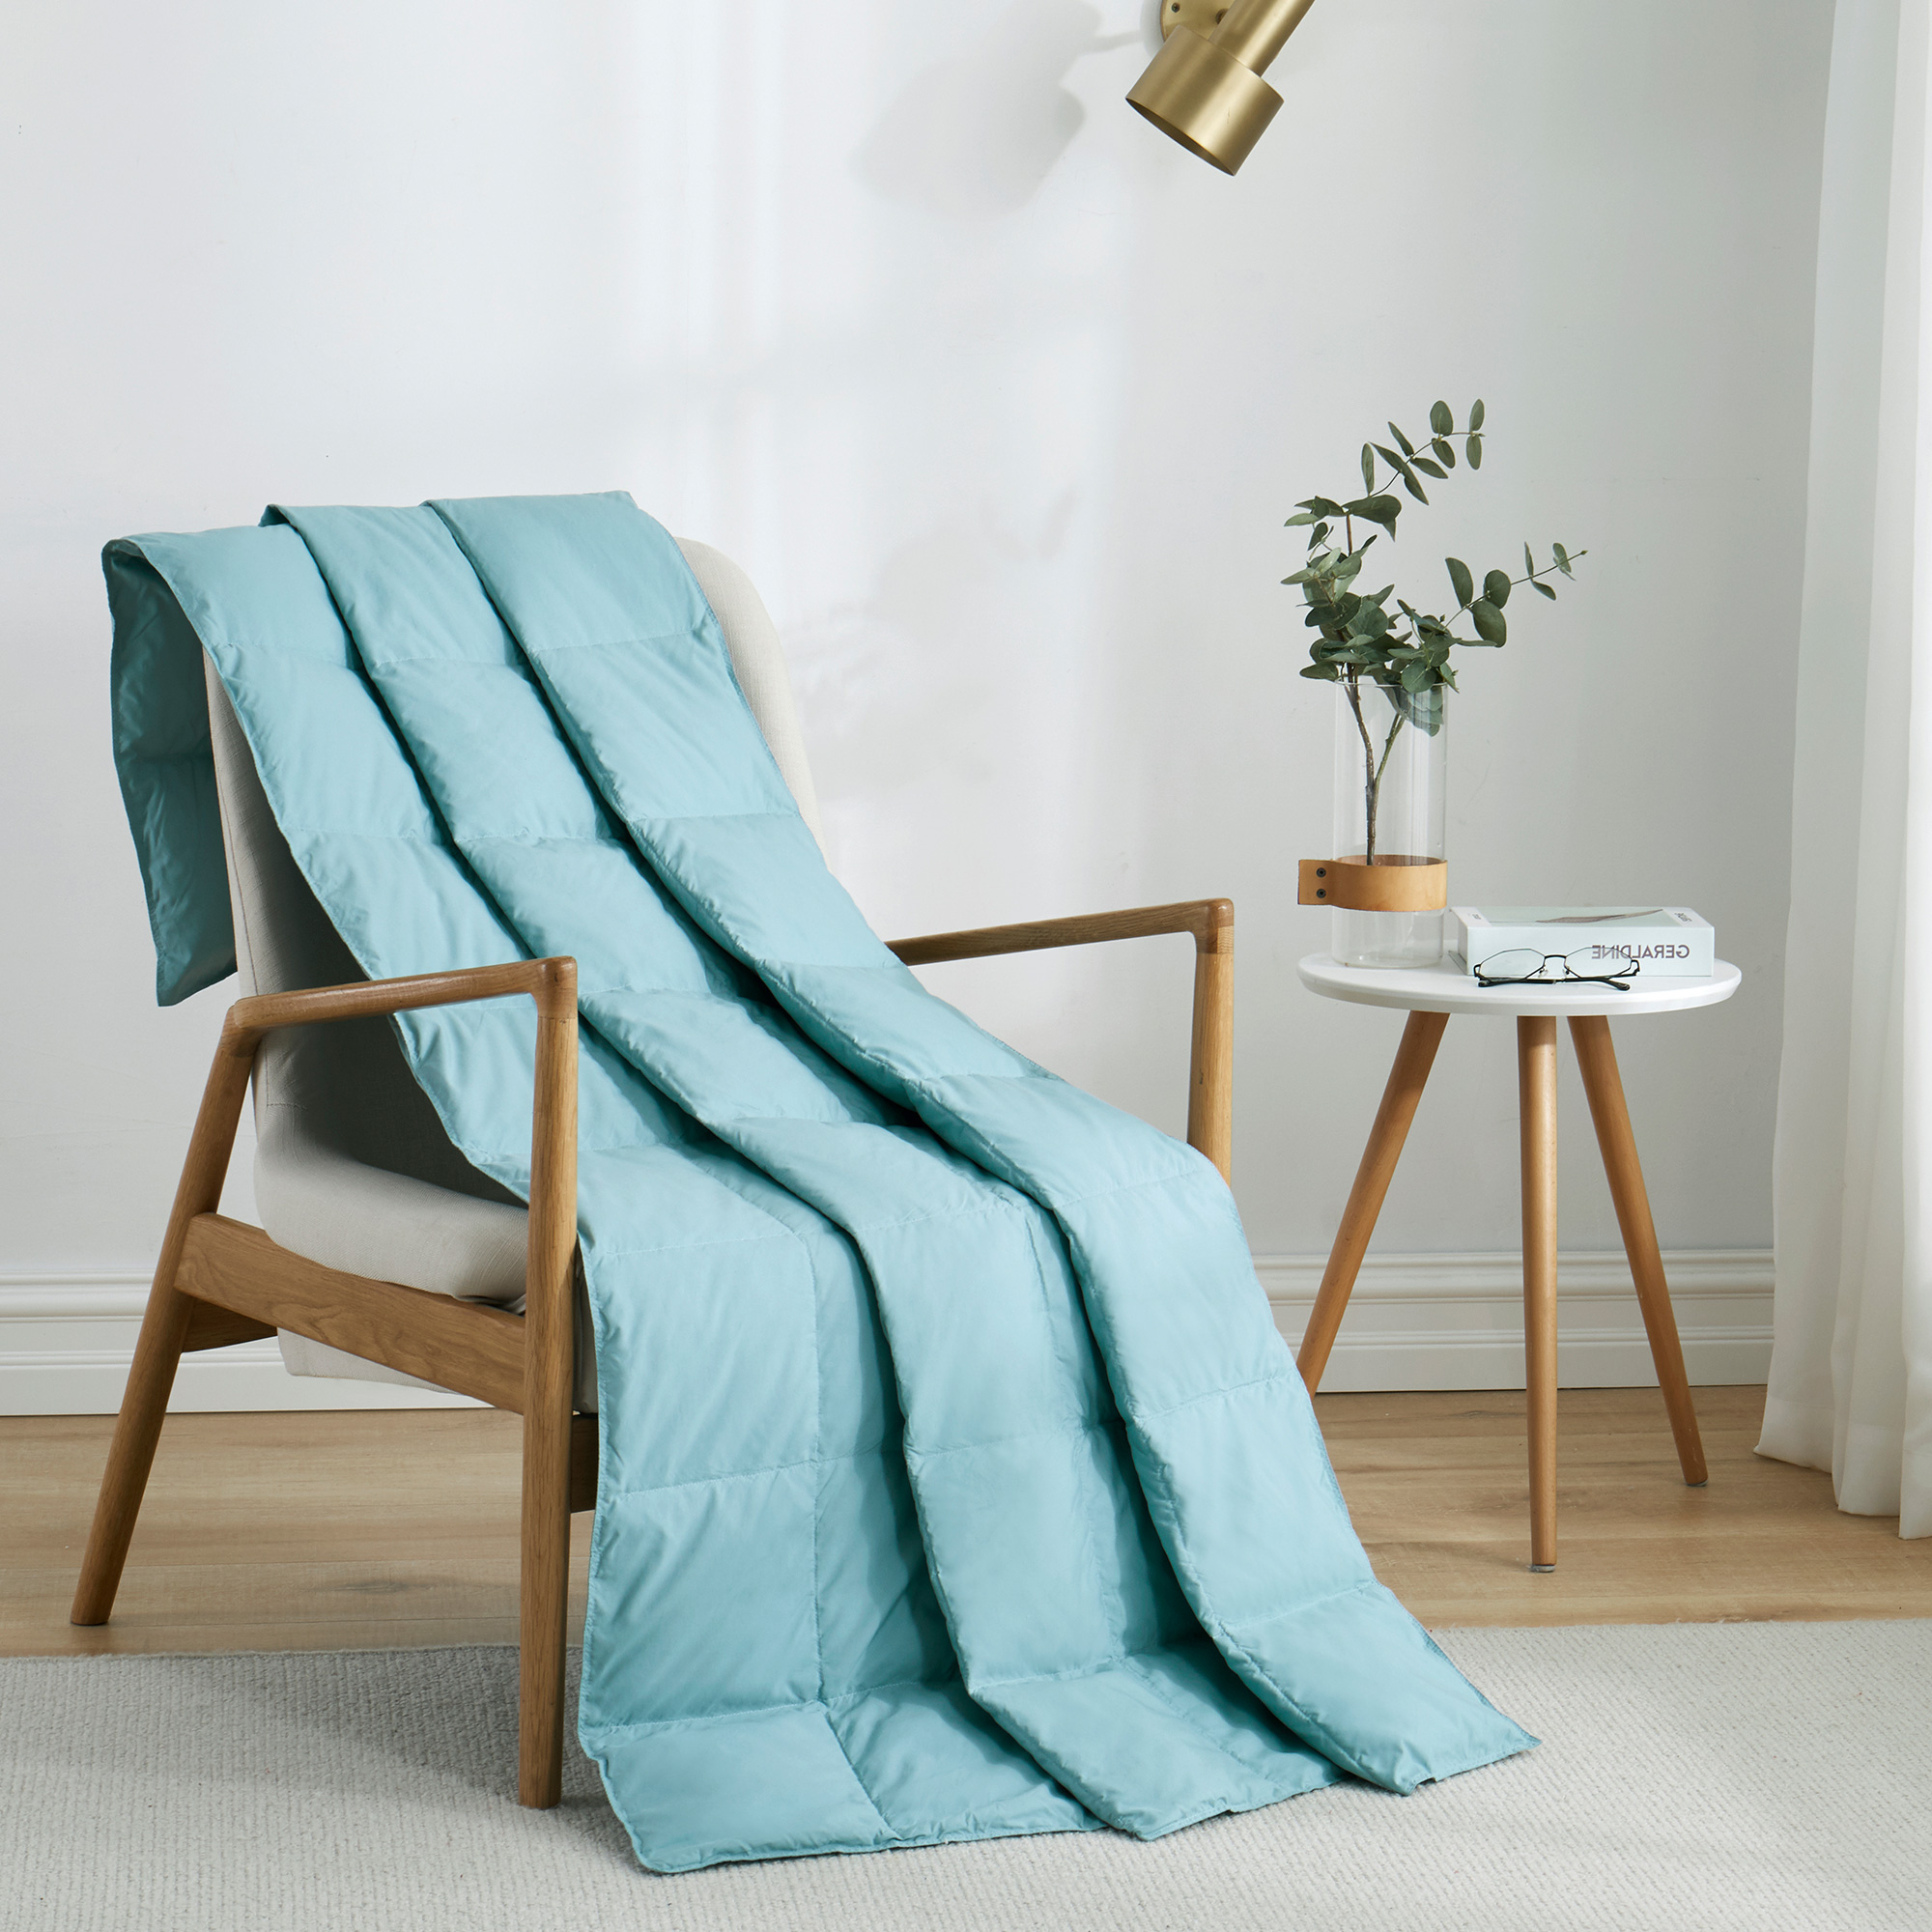 Natural Down Blanket Filled With UltraFeather And Down, Throw Blanket (50 X 70) Sewn Through Box Design - Light Blue